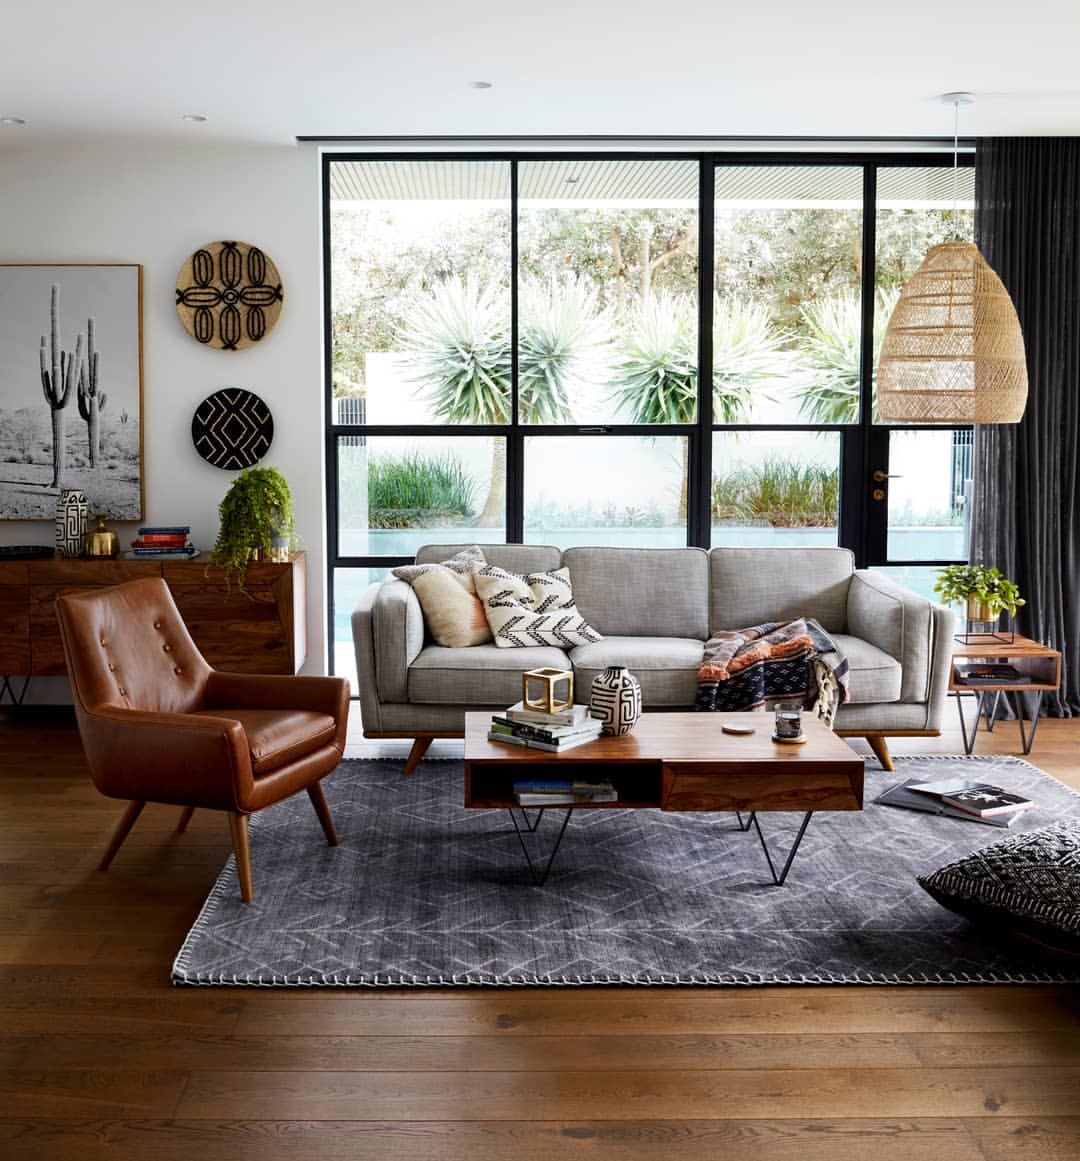 A cozy, light-toned living room features a beige sofa with matching armchair, decorated with blue and gray pillows. A wooden coffee table with storage sits on a patterned rug. A side table with a lamp and decor, along with tall windows and wall art, complete the space.